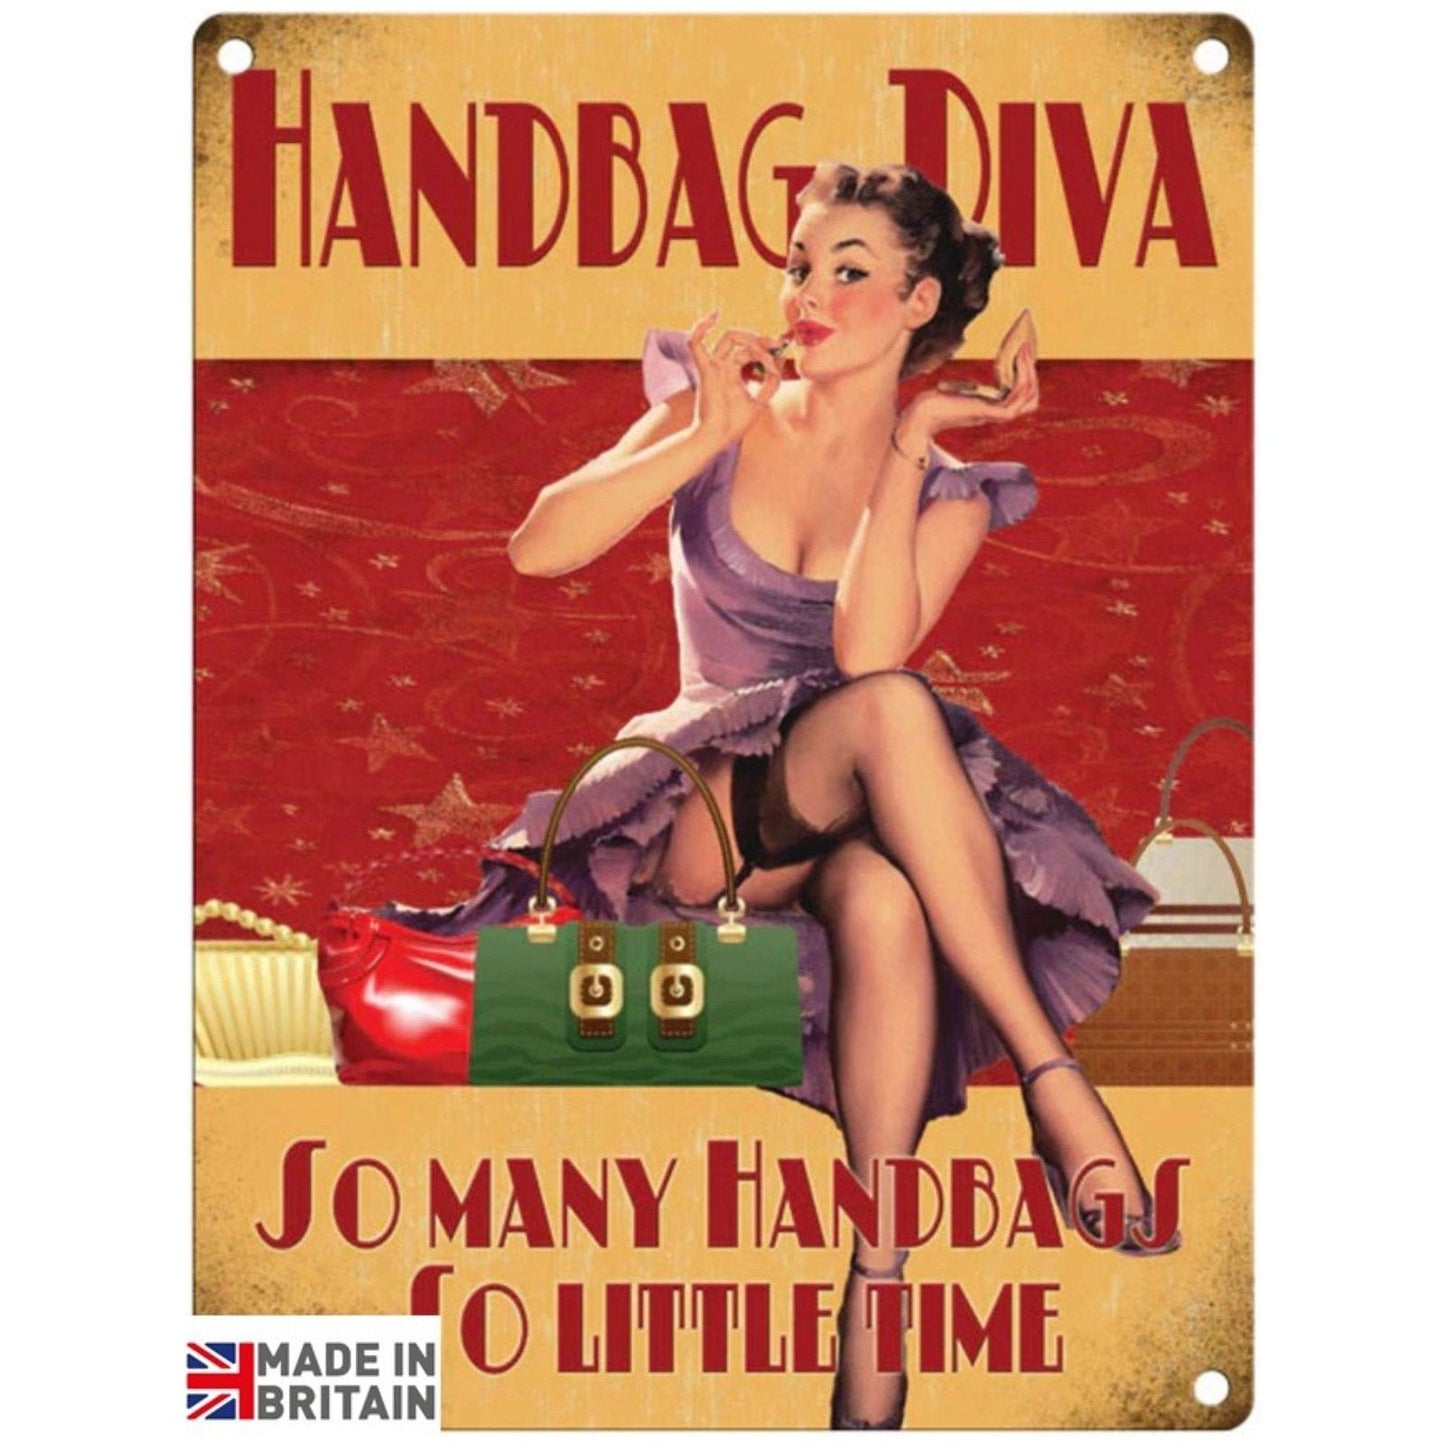 Small Metal Sign 45 x 37.5cm Funny Hand Bag Diva - Ashton and Finch